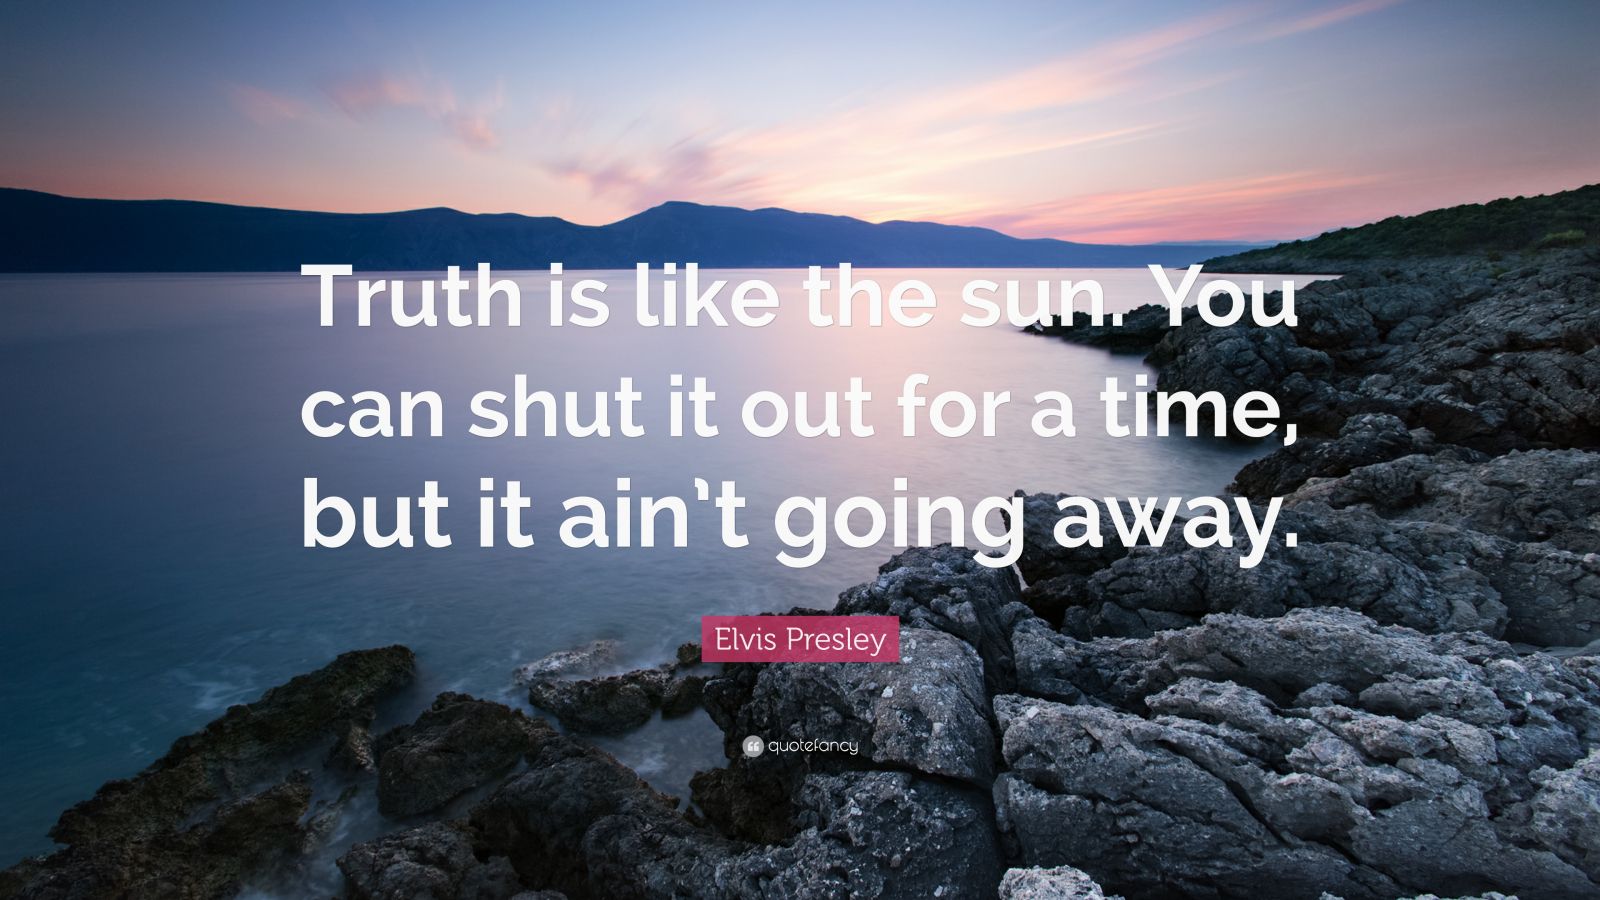 Elvis Presley Quote: "Truth is like the sun. You can shut ...